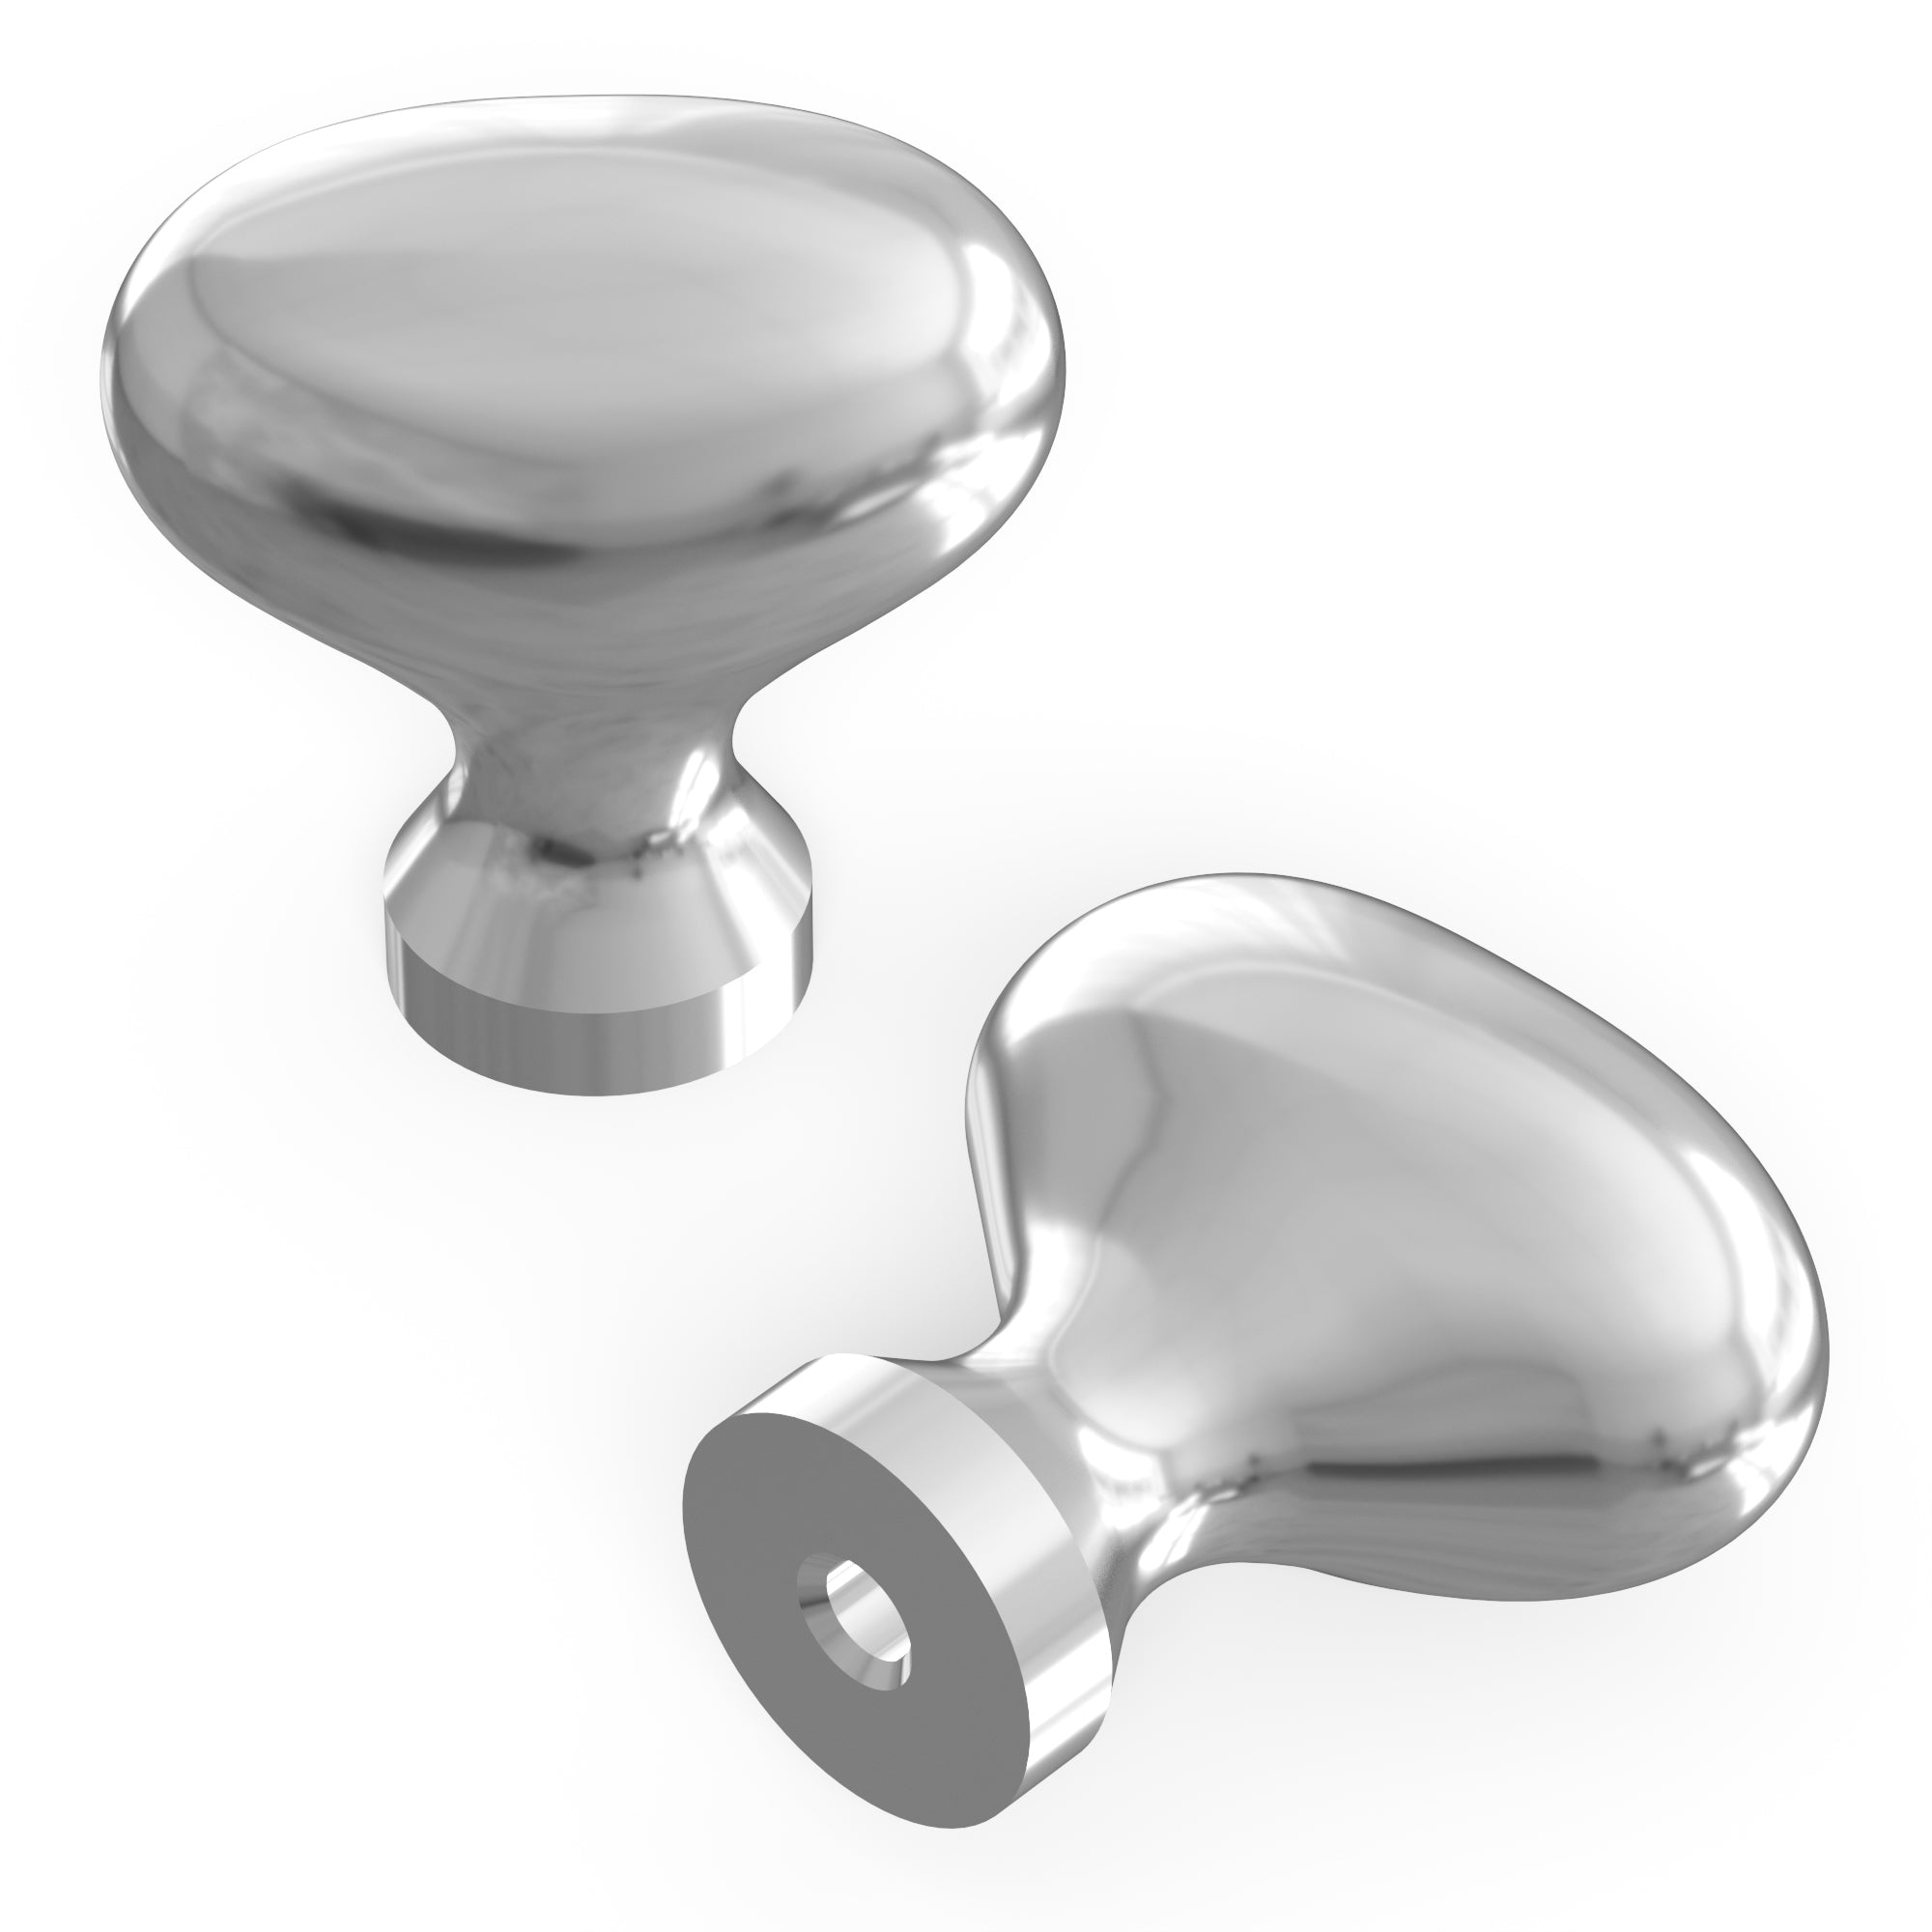 Shop Furniture and Cabinet Knobs